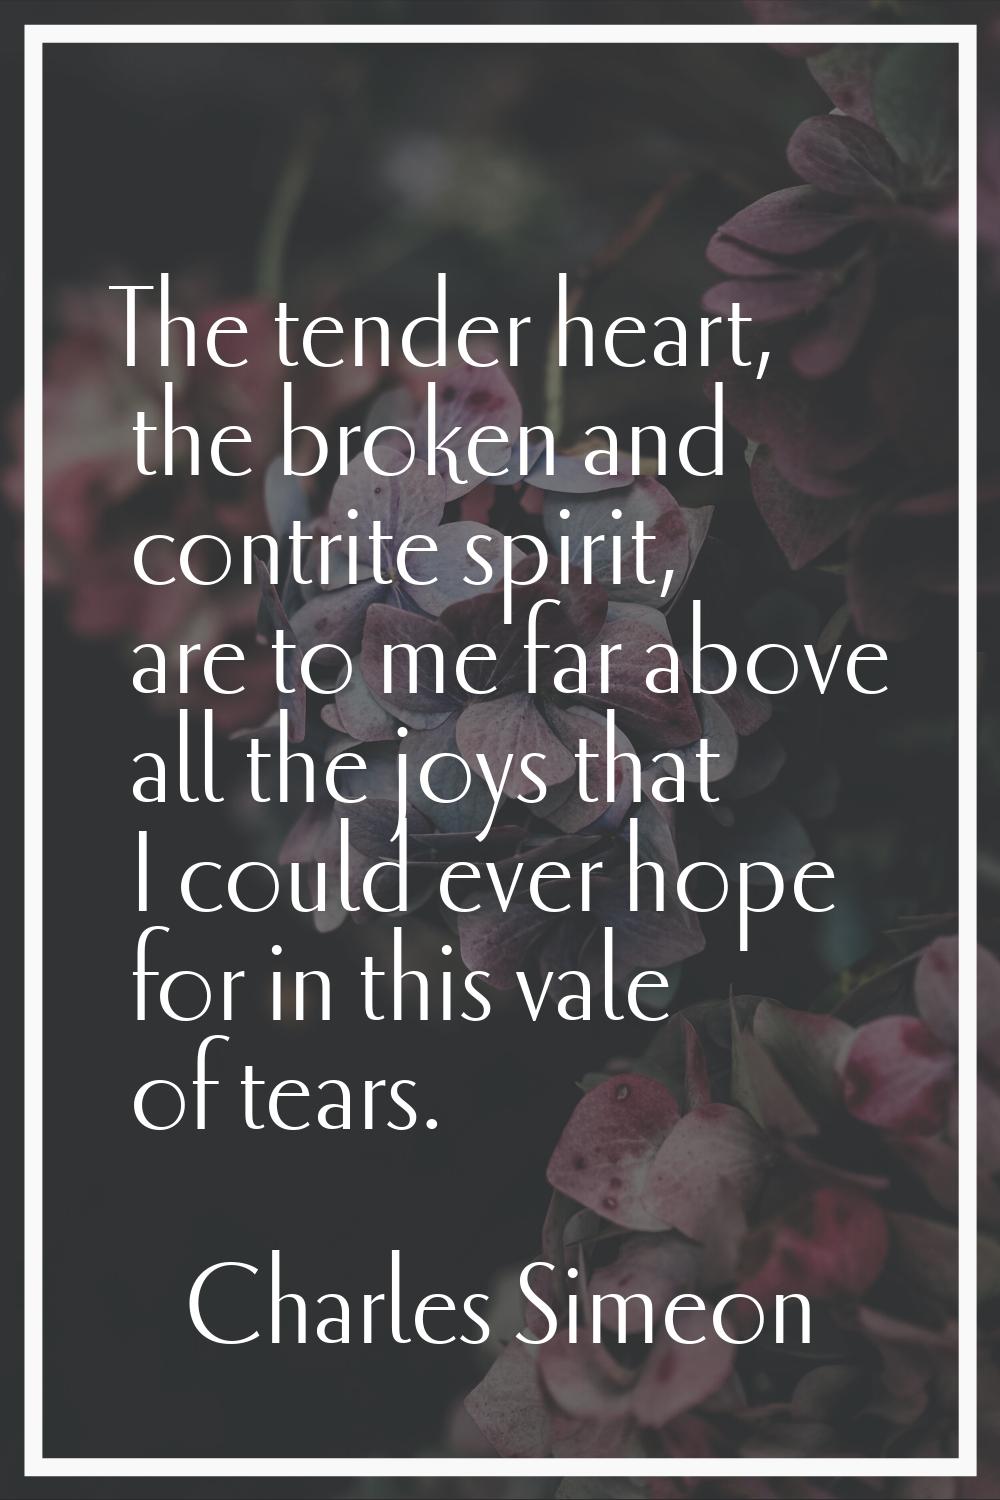 The tender heart, the broken and contrite spirit, are to me far above all the joys that I could eve